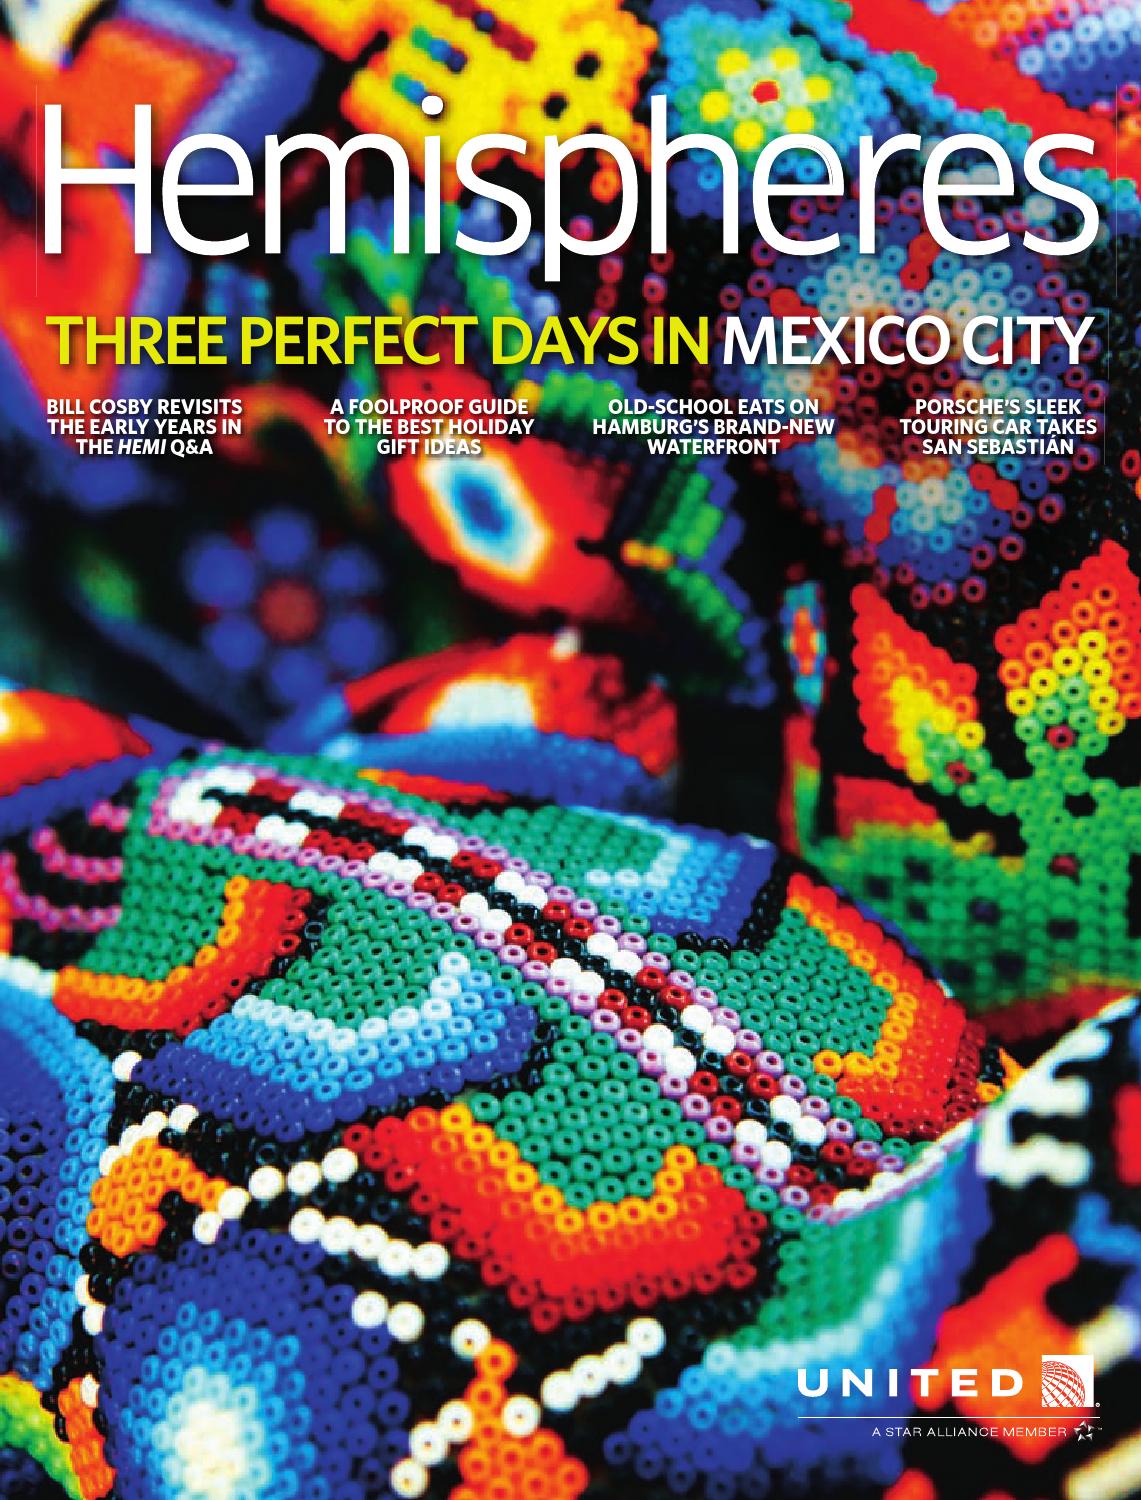 CanapÃ© Jardin Luxe United Airlines Hemispheres Magazine November 2011 by Ahmed